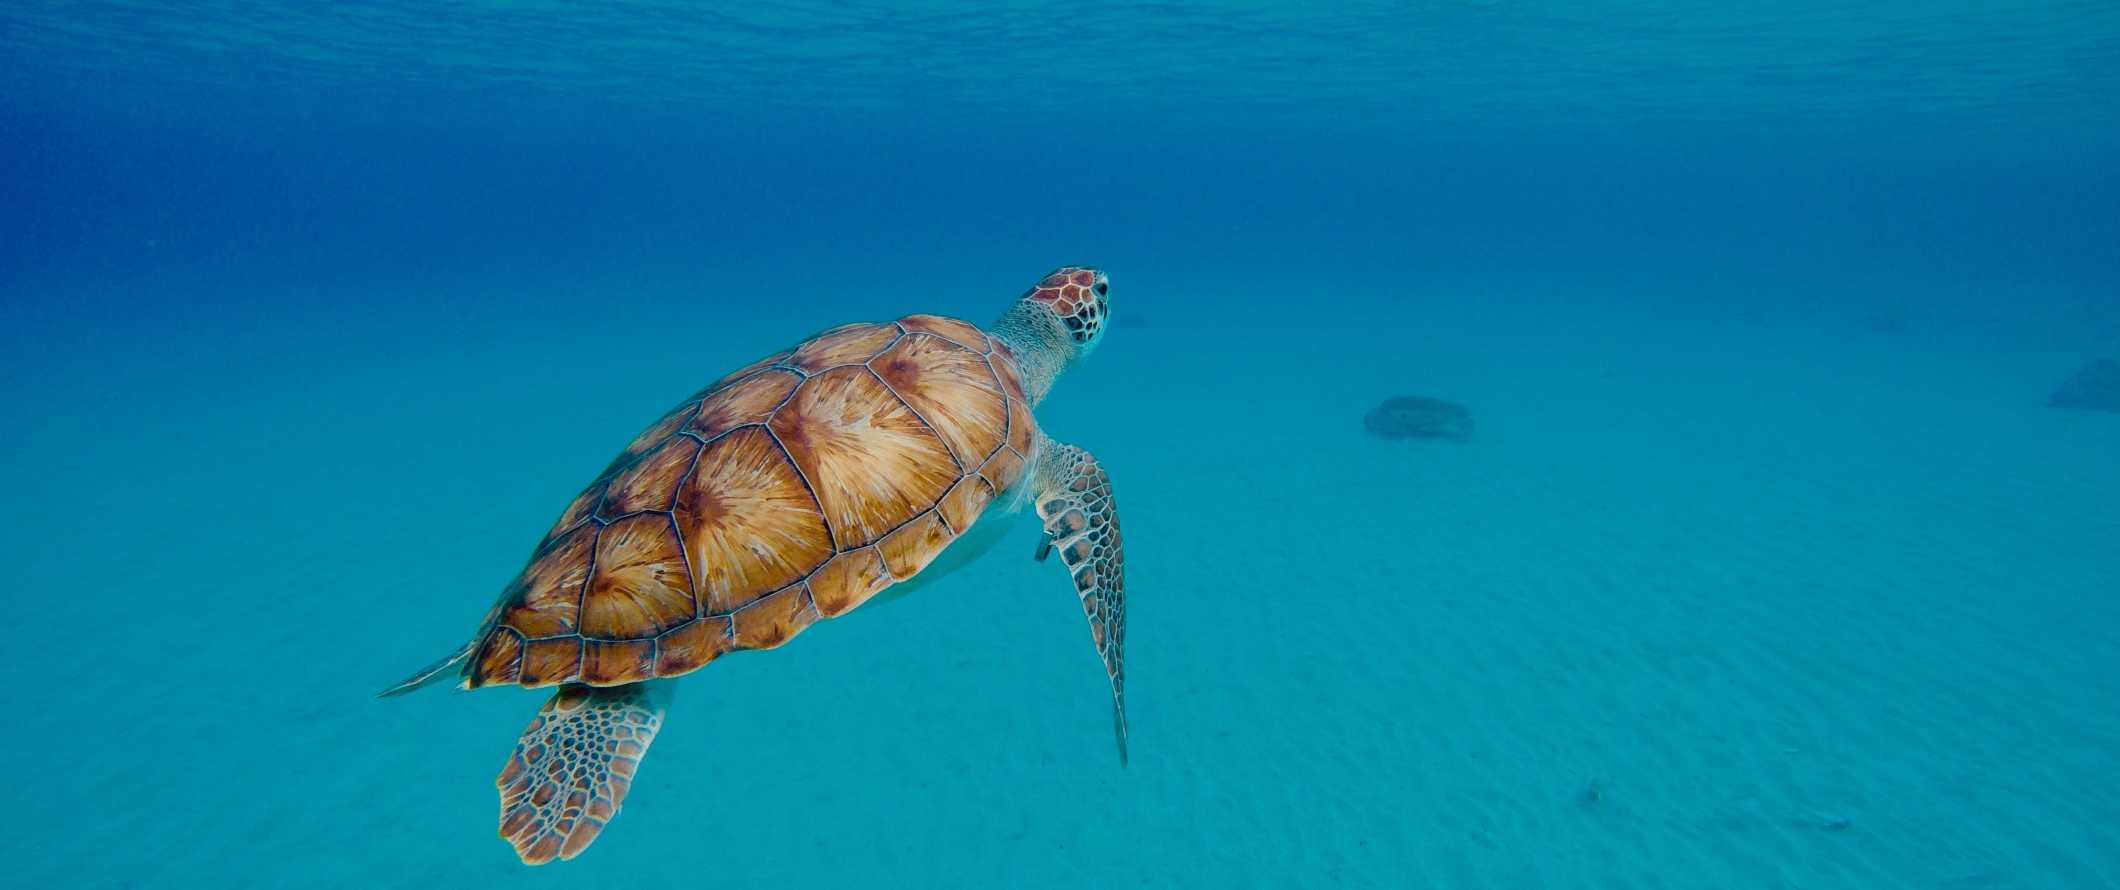 A sea turtle swimming through the clear waters in the Caribbean